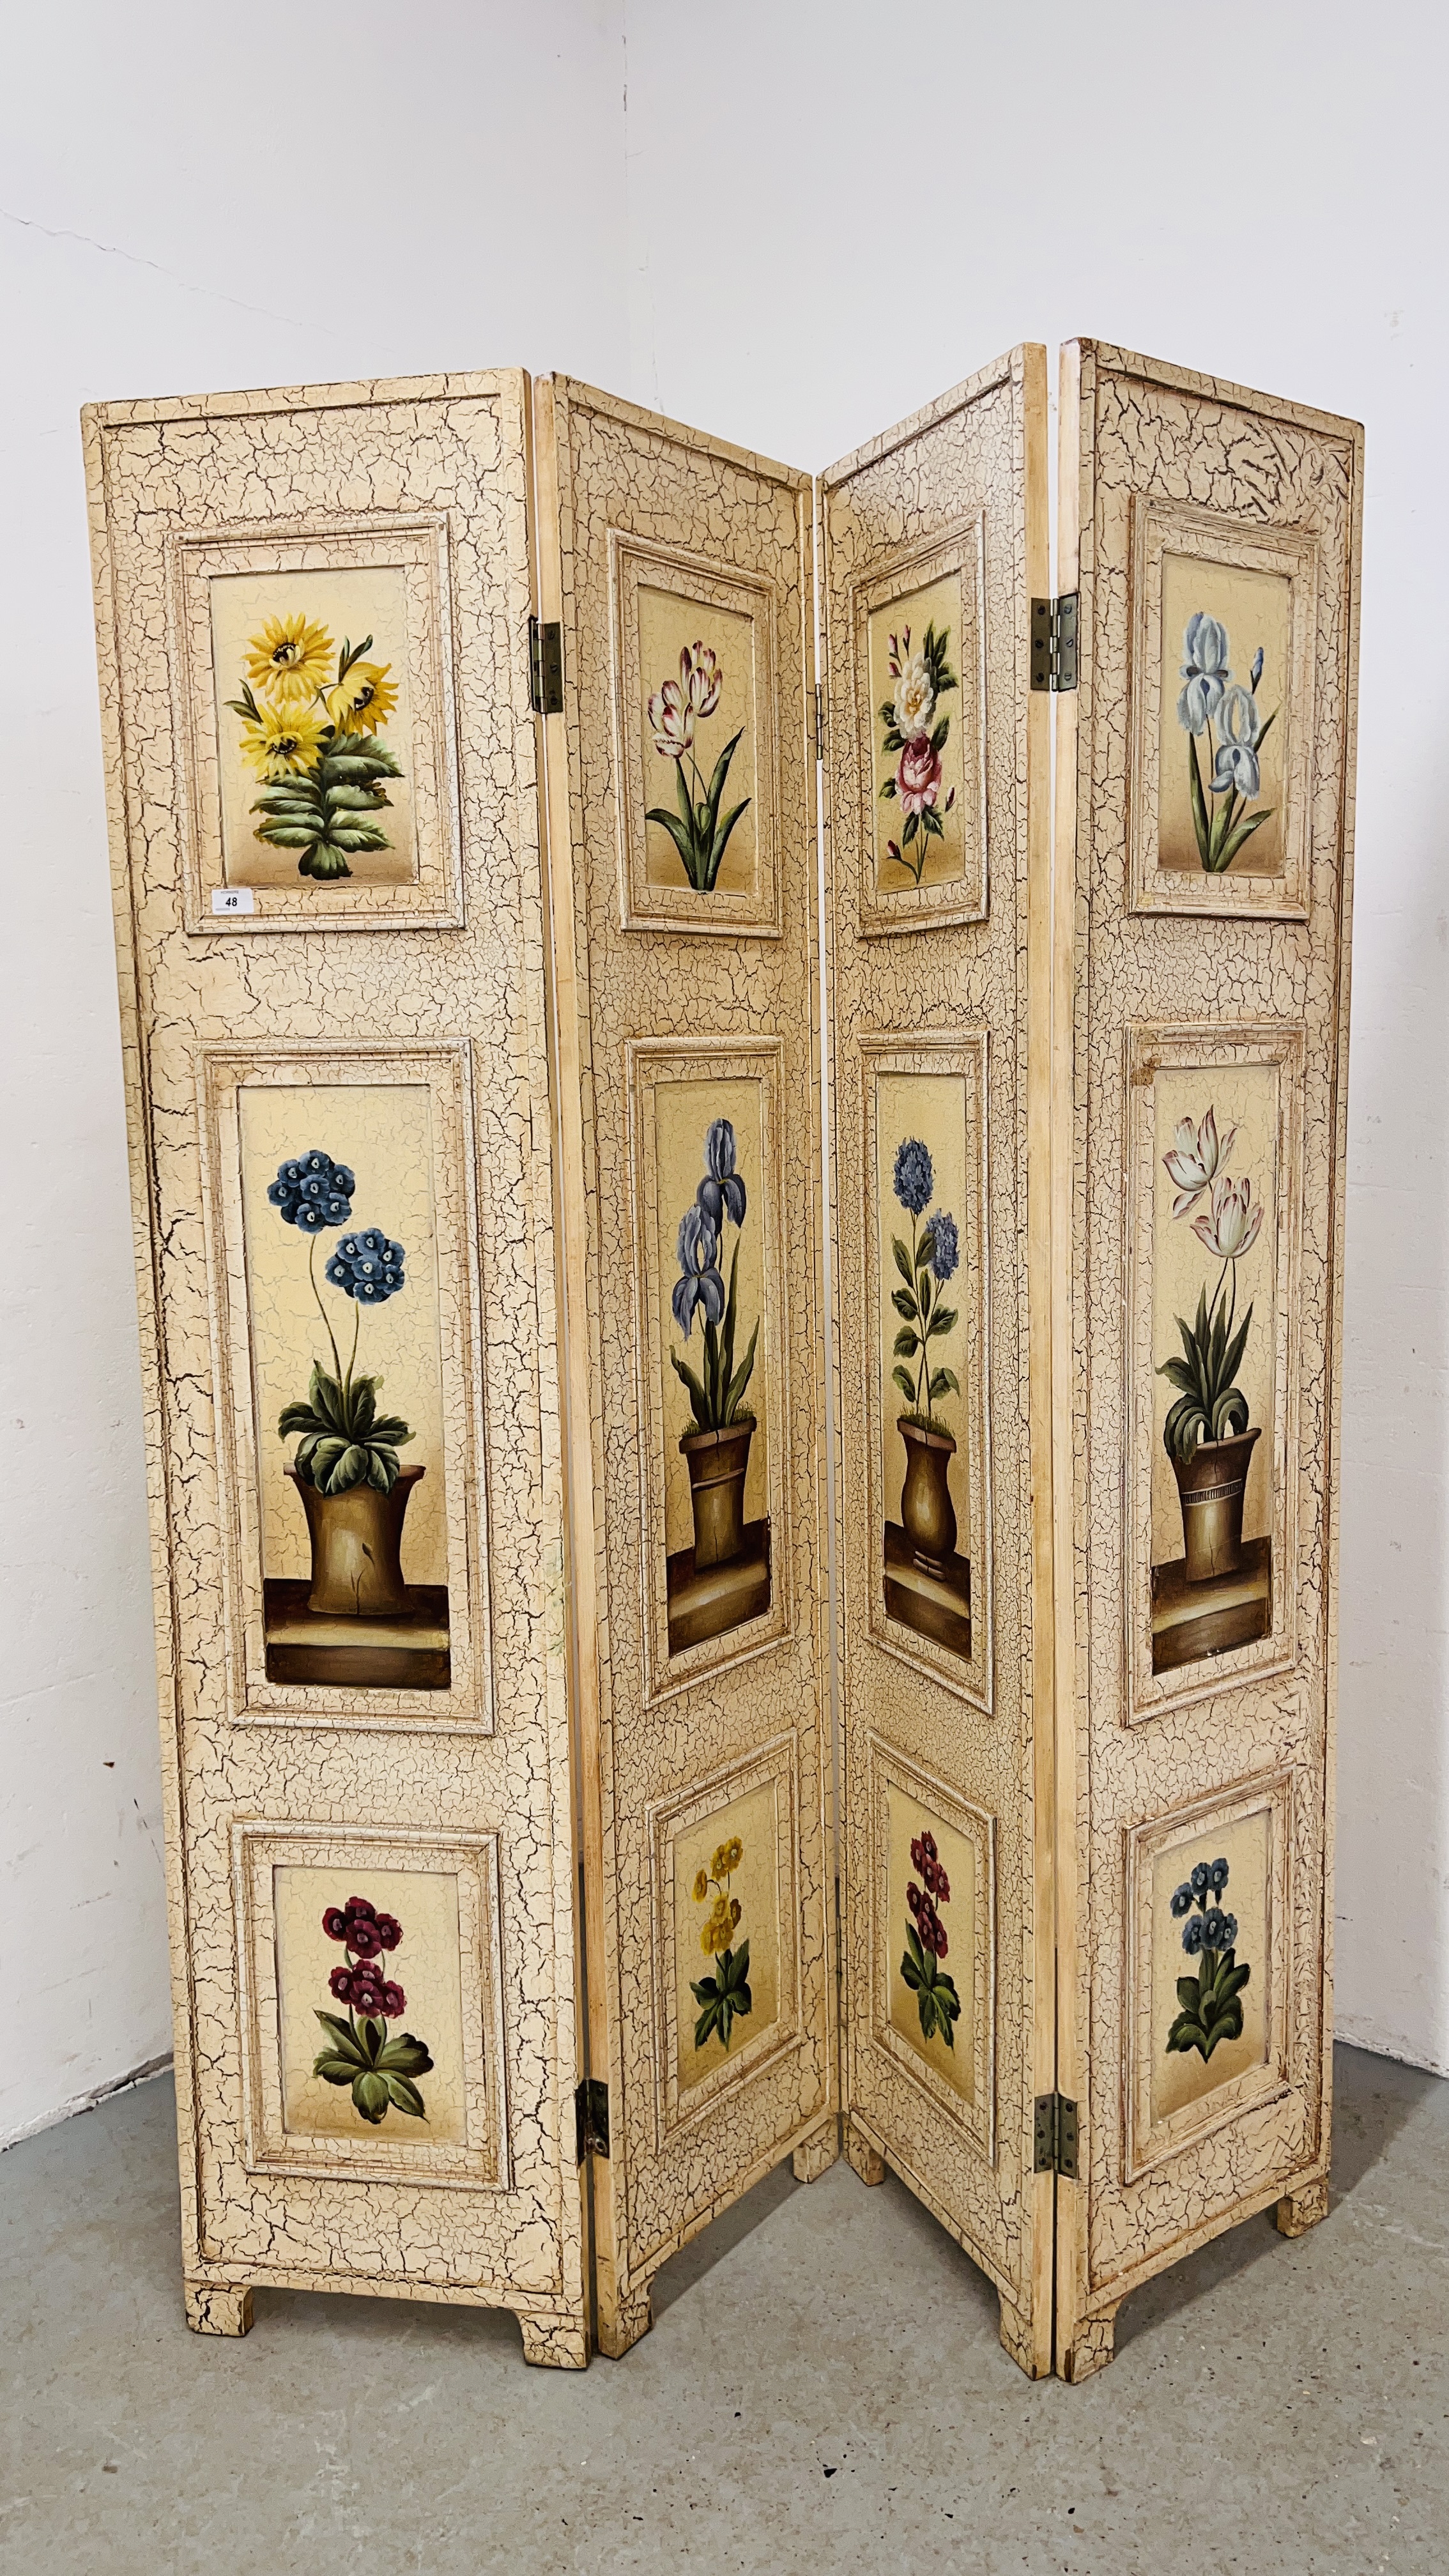 A FOUR FOLD SCREEN DECORATED WITH HAND PAINTED STILL LIFE EACH SECTION 180CM. X 40CM.